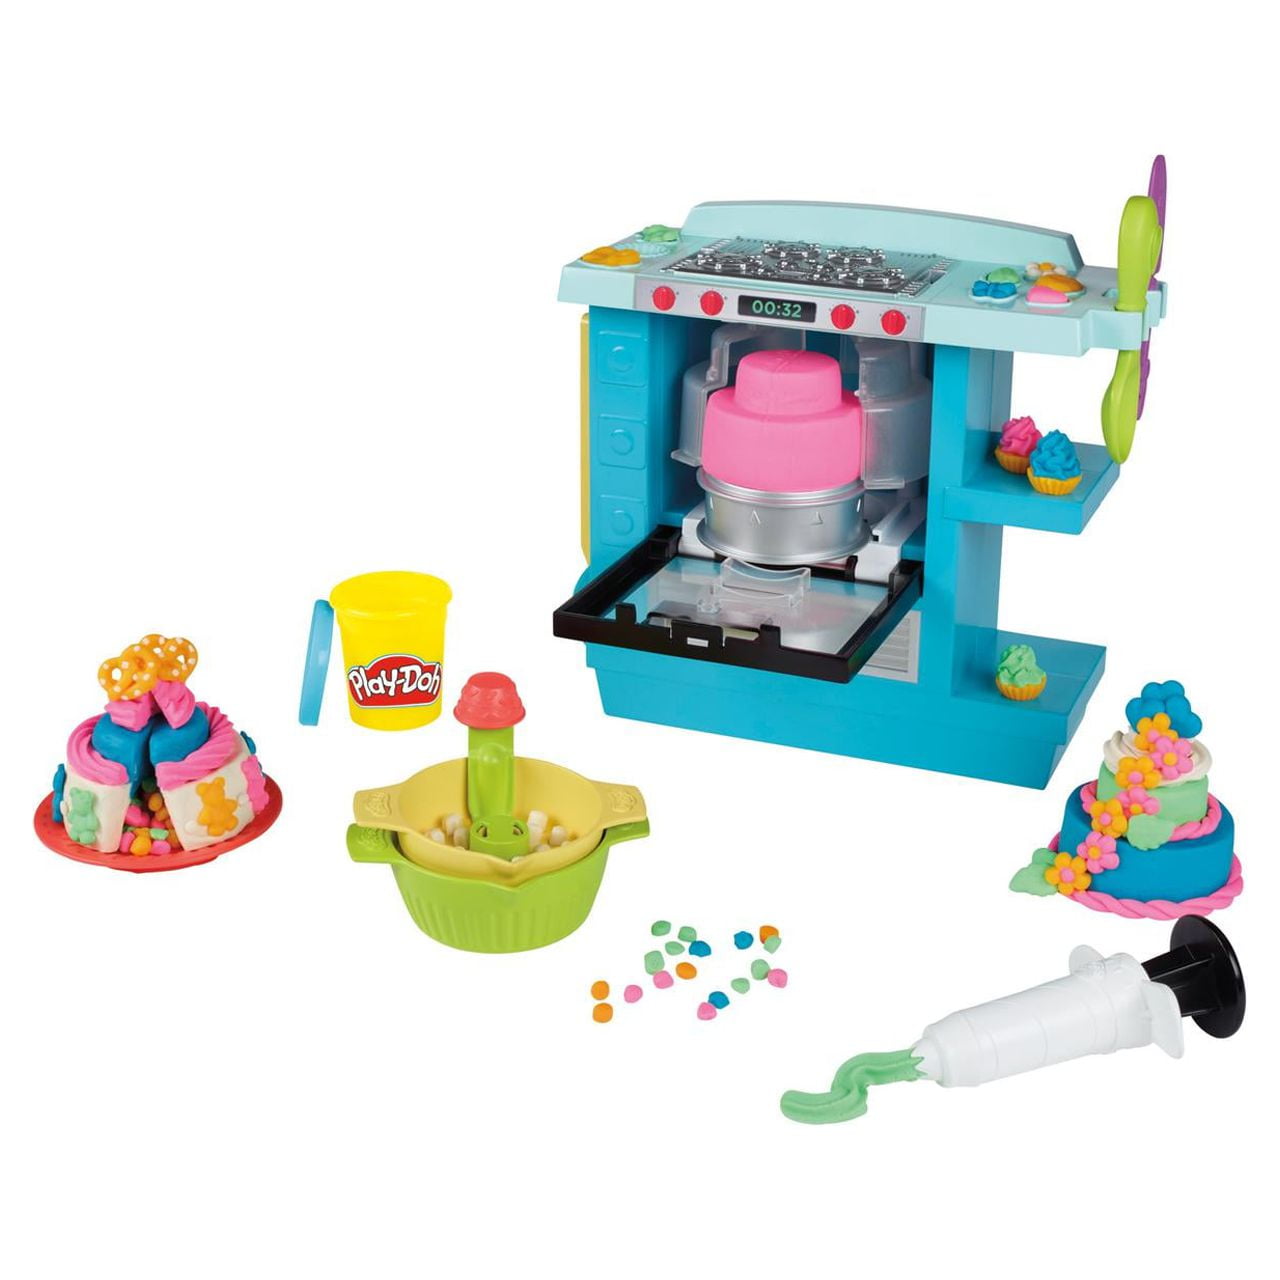 Play-Doh Kitchen Creations Rising Cake Oven Playset 5010993839438